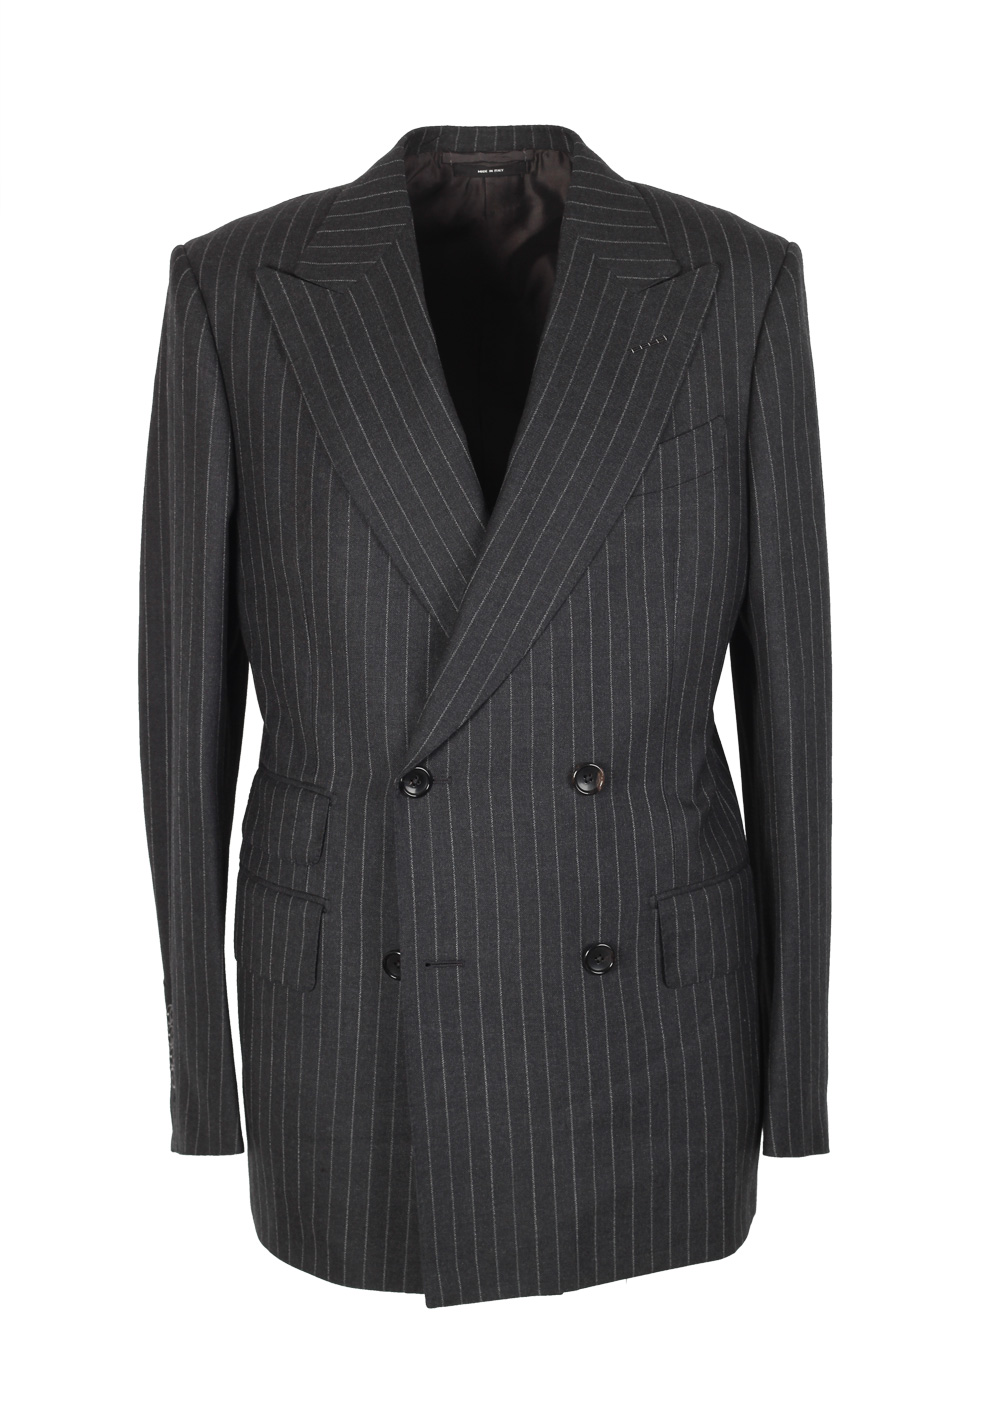 TOM FORD Shelton Double Breasted Striped Gray Suit Size 46 / 36R U.S ...